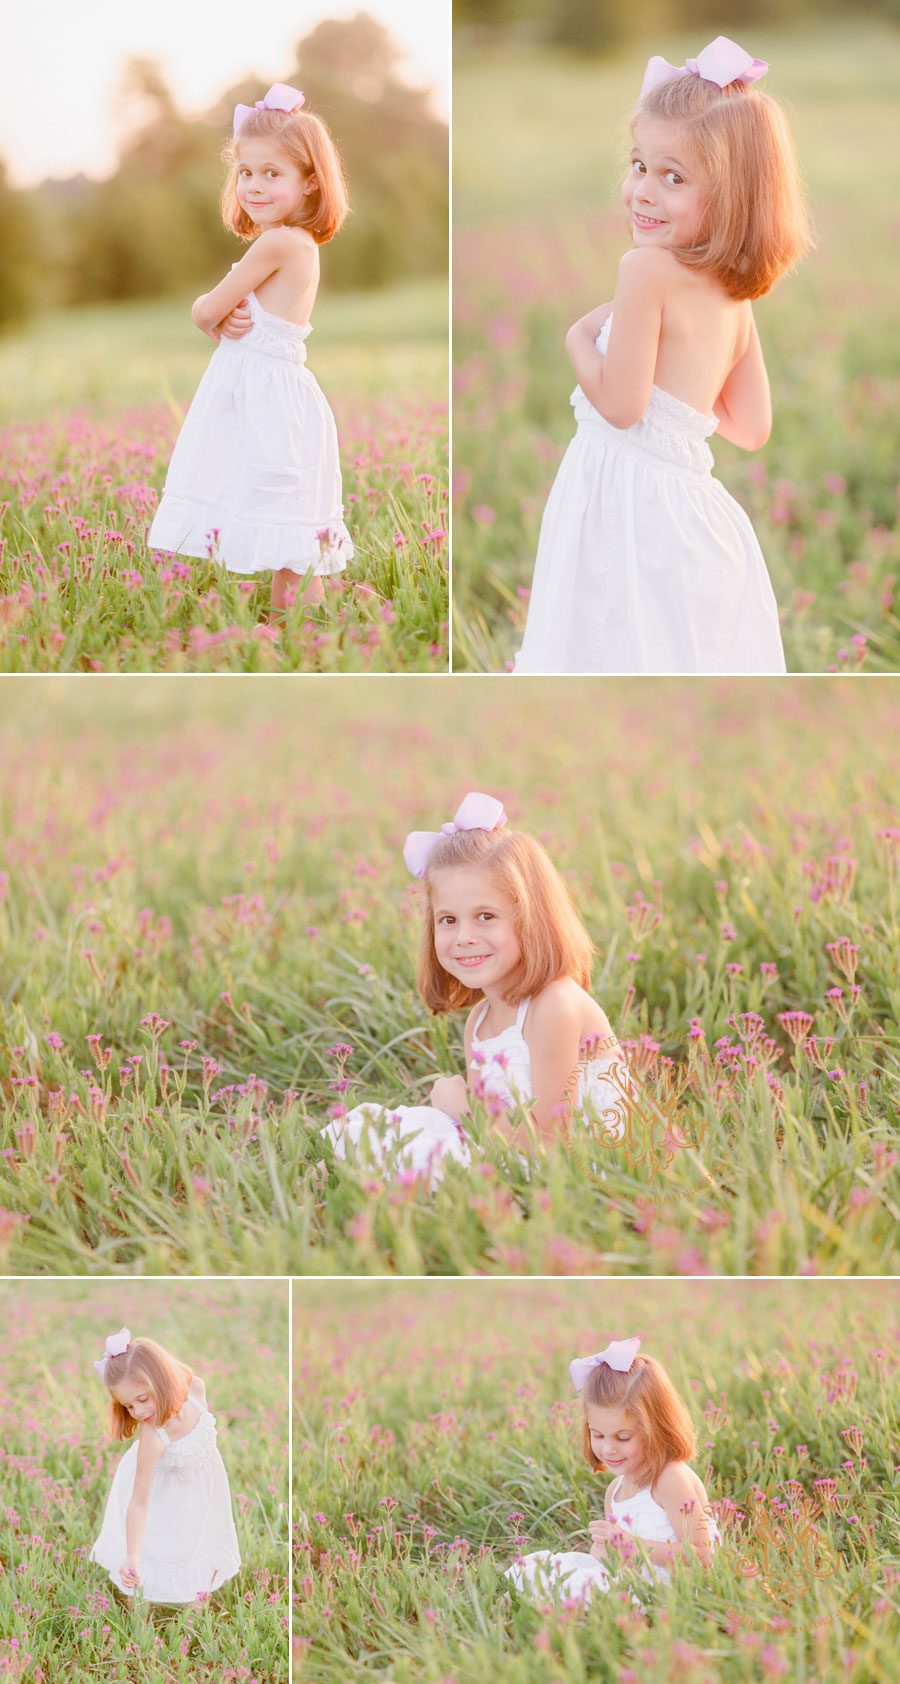 Photos of a child playing in a field of purple flowers near Athens, GA.